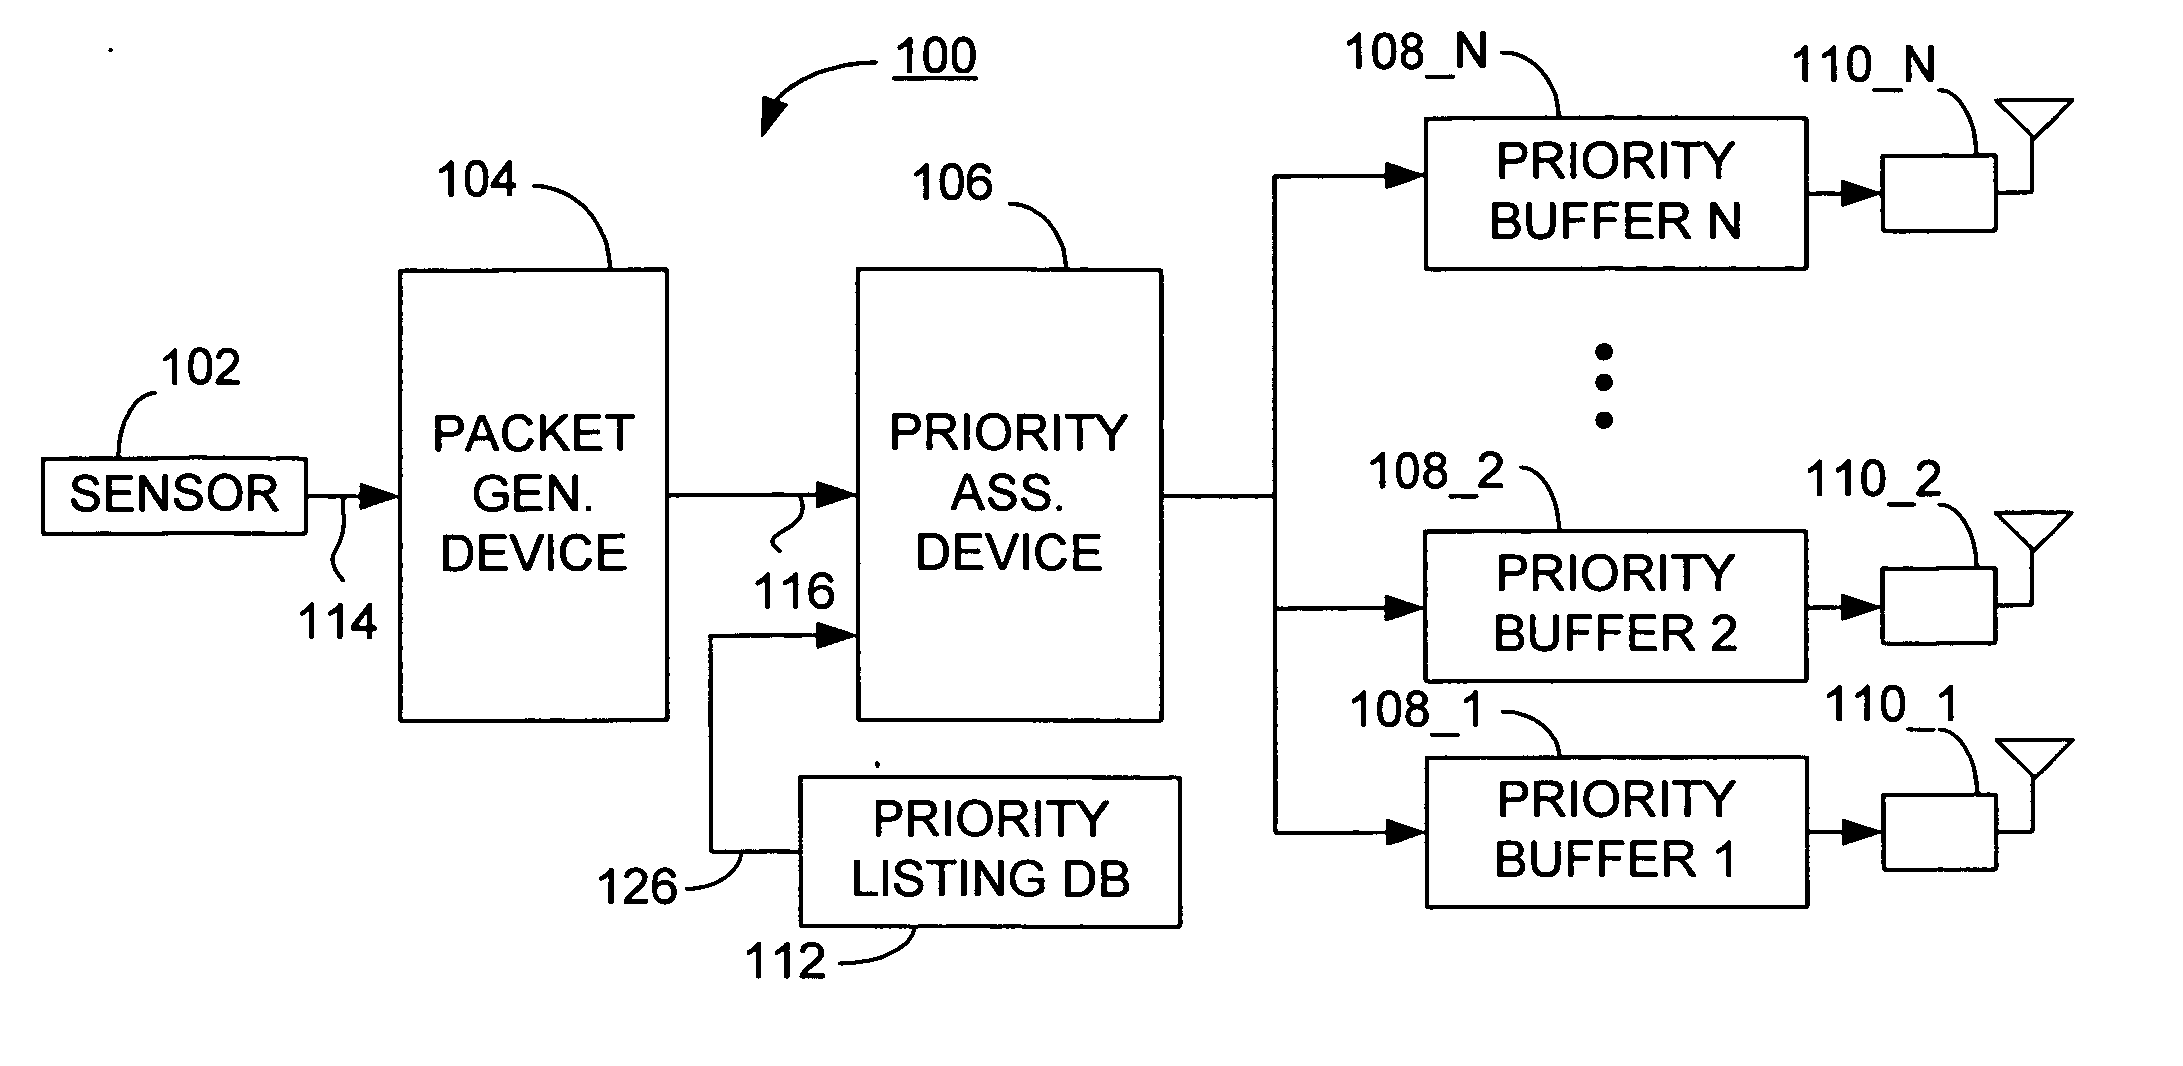 Priority assignment and transmission of sensor data